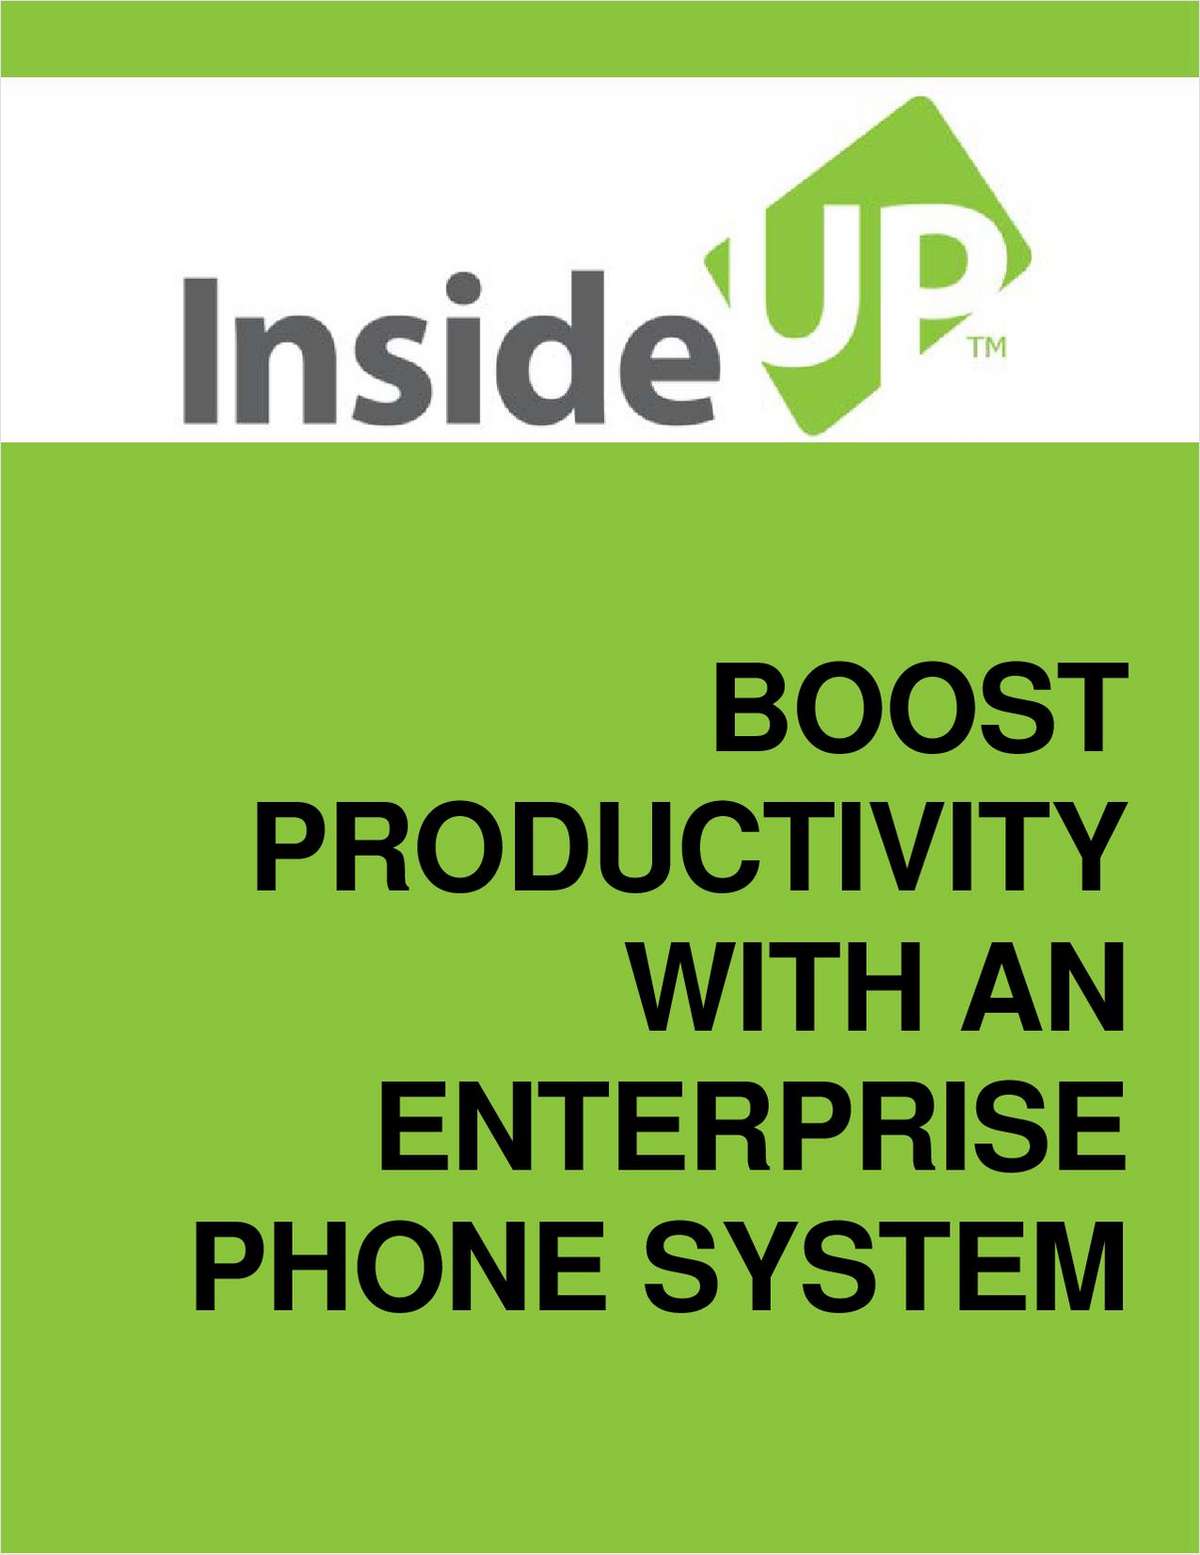 Cost-Effective Phone Systems for Enterprise Level Companies